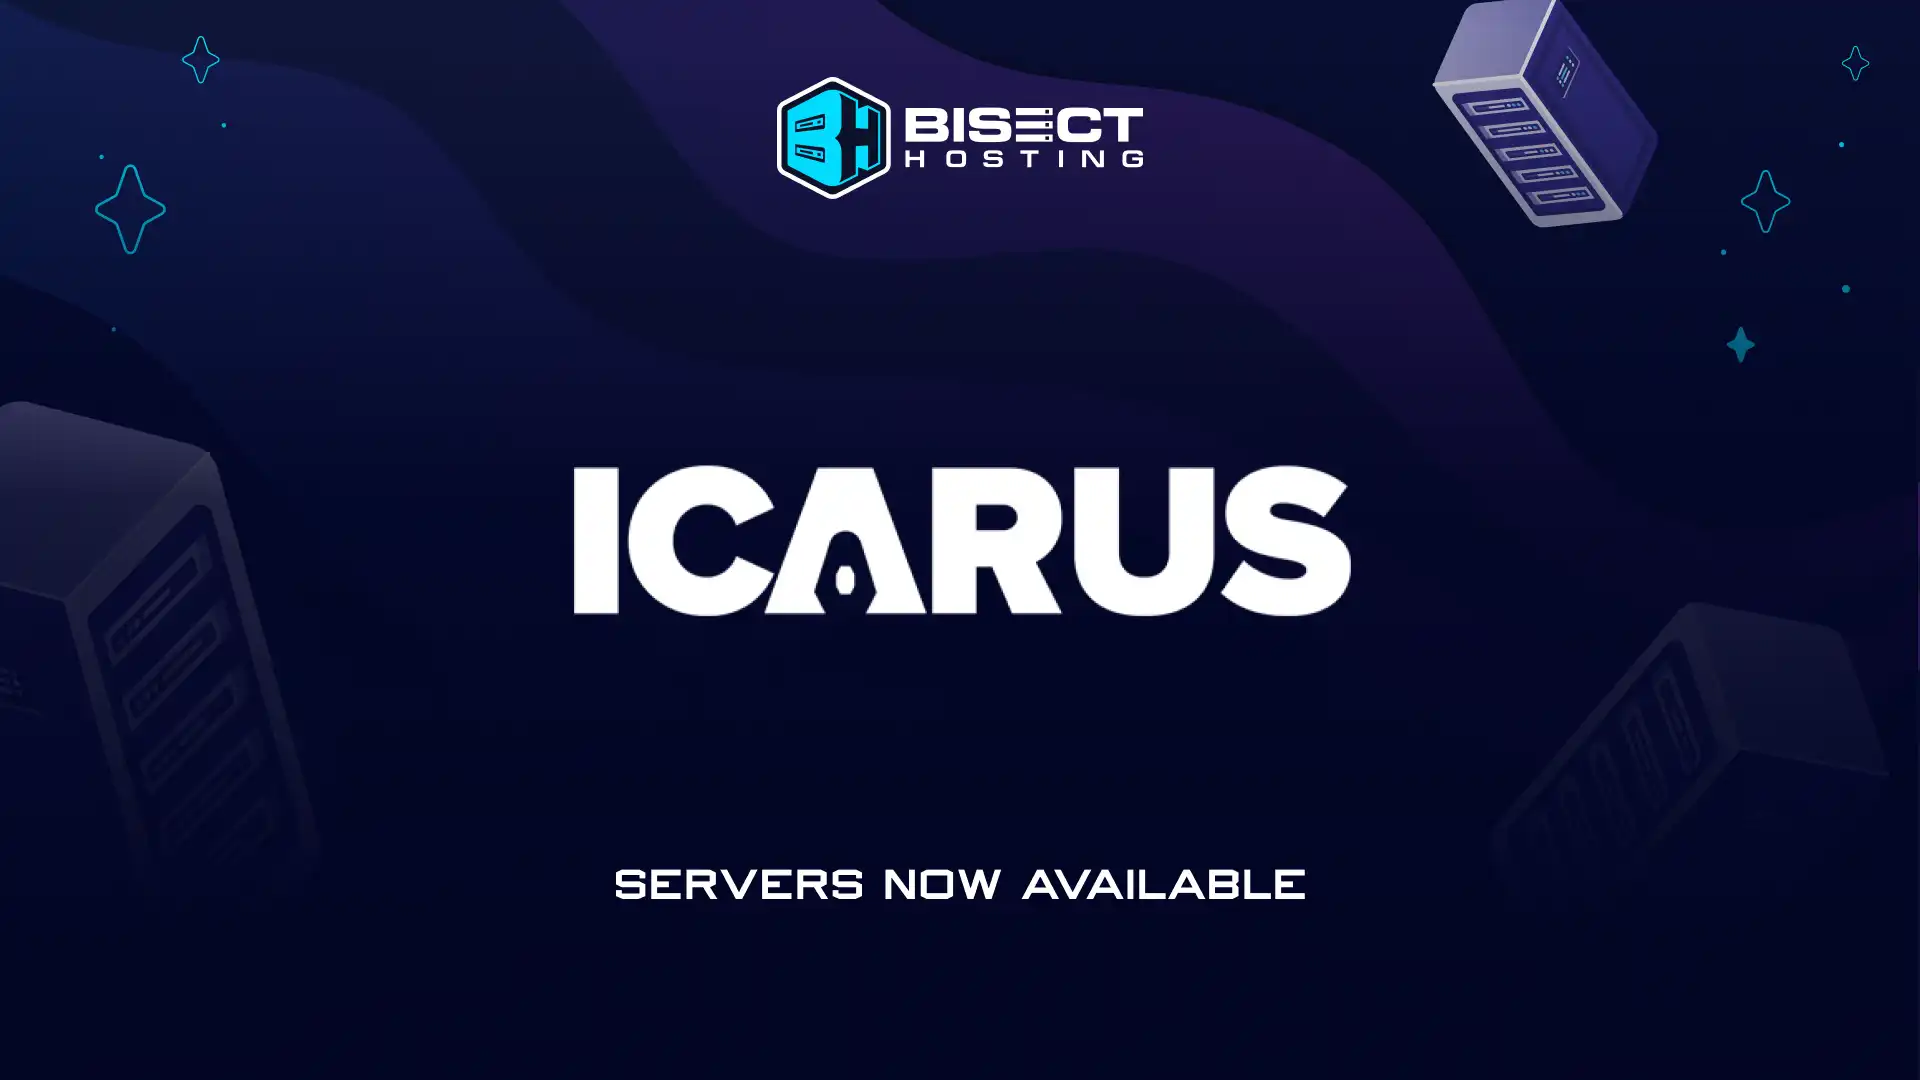 Icarus Dedicated Server Hosting Available Now With BisectHosting